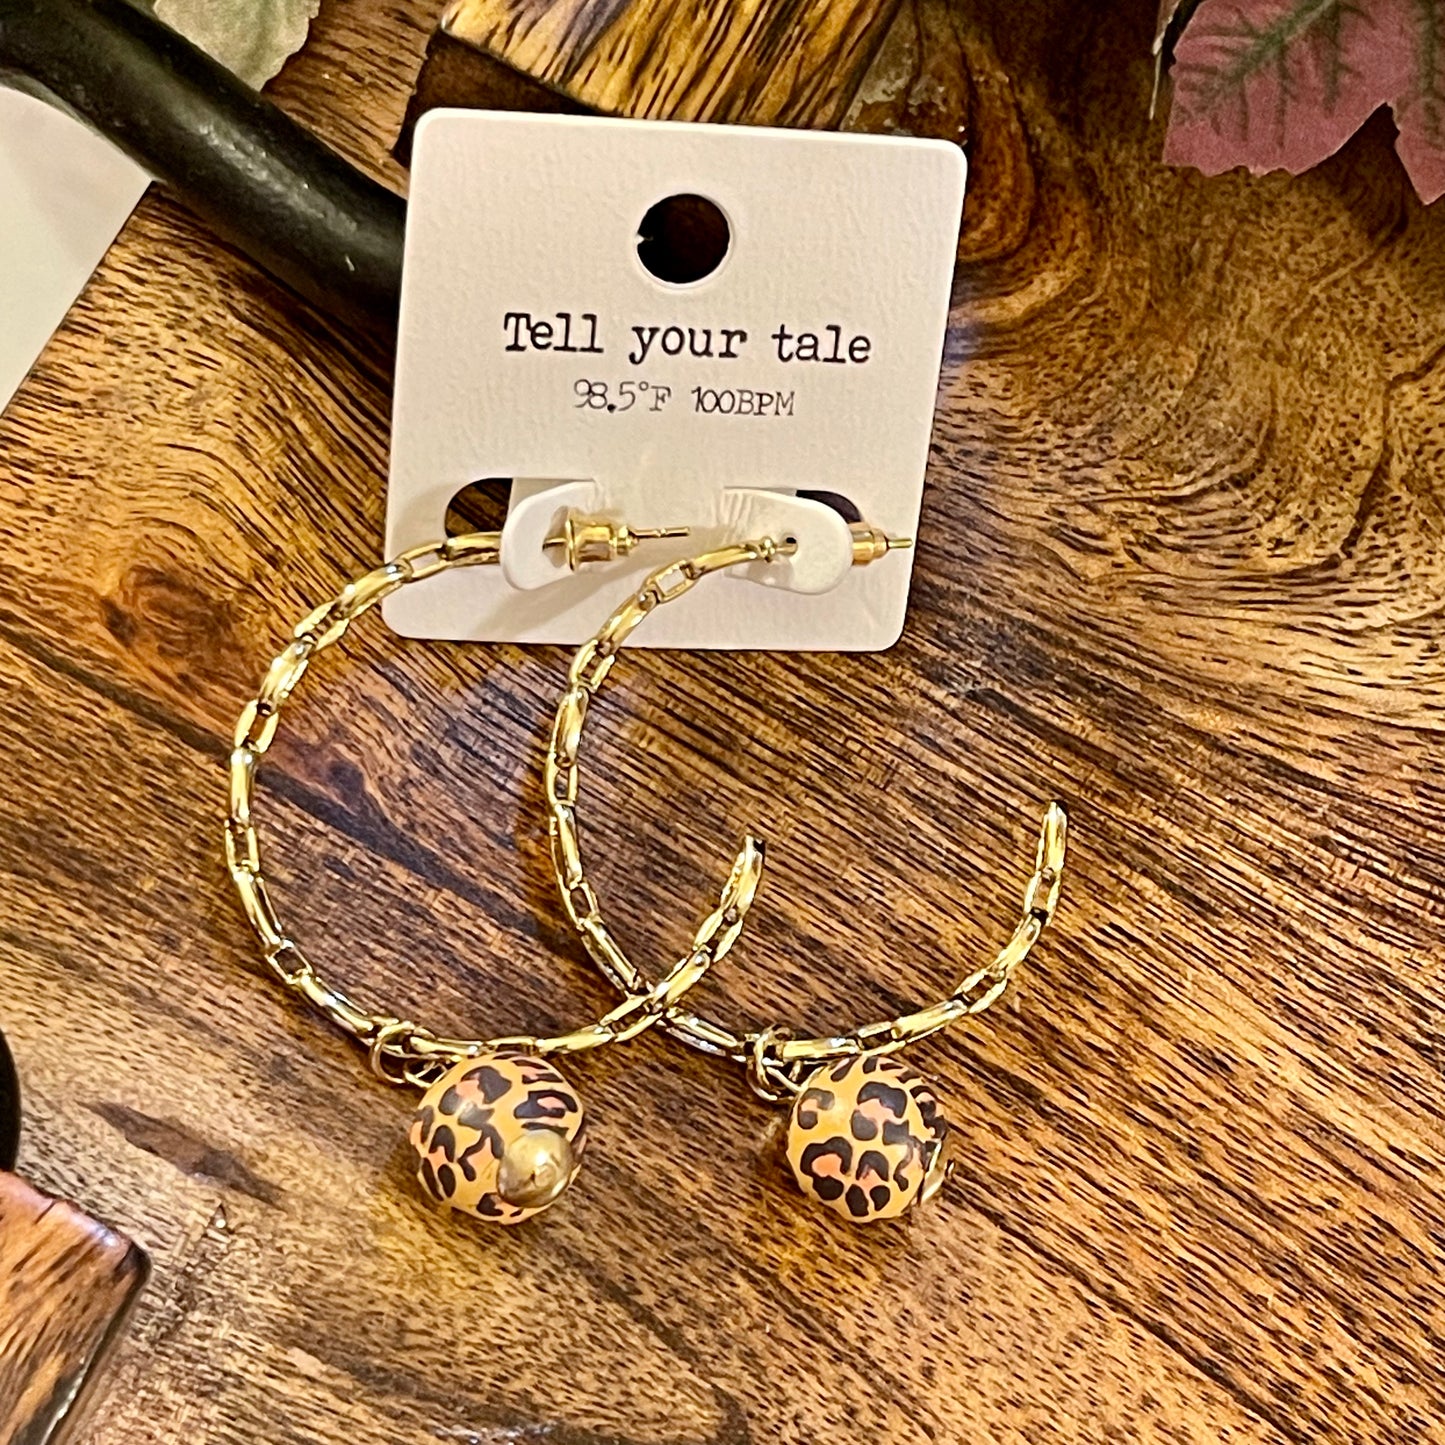 Gold Chainlink Half Hoop Post Back Earrings with Leopard Print Charm